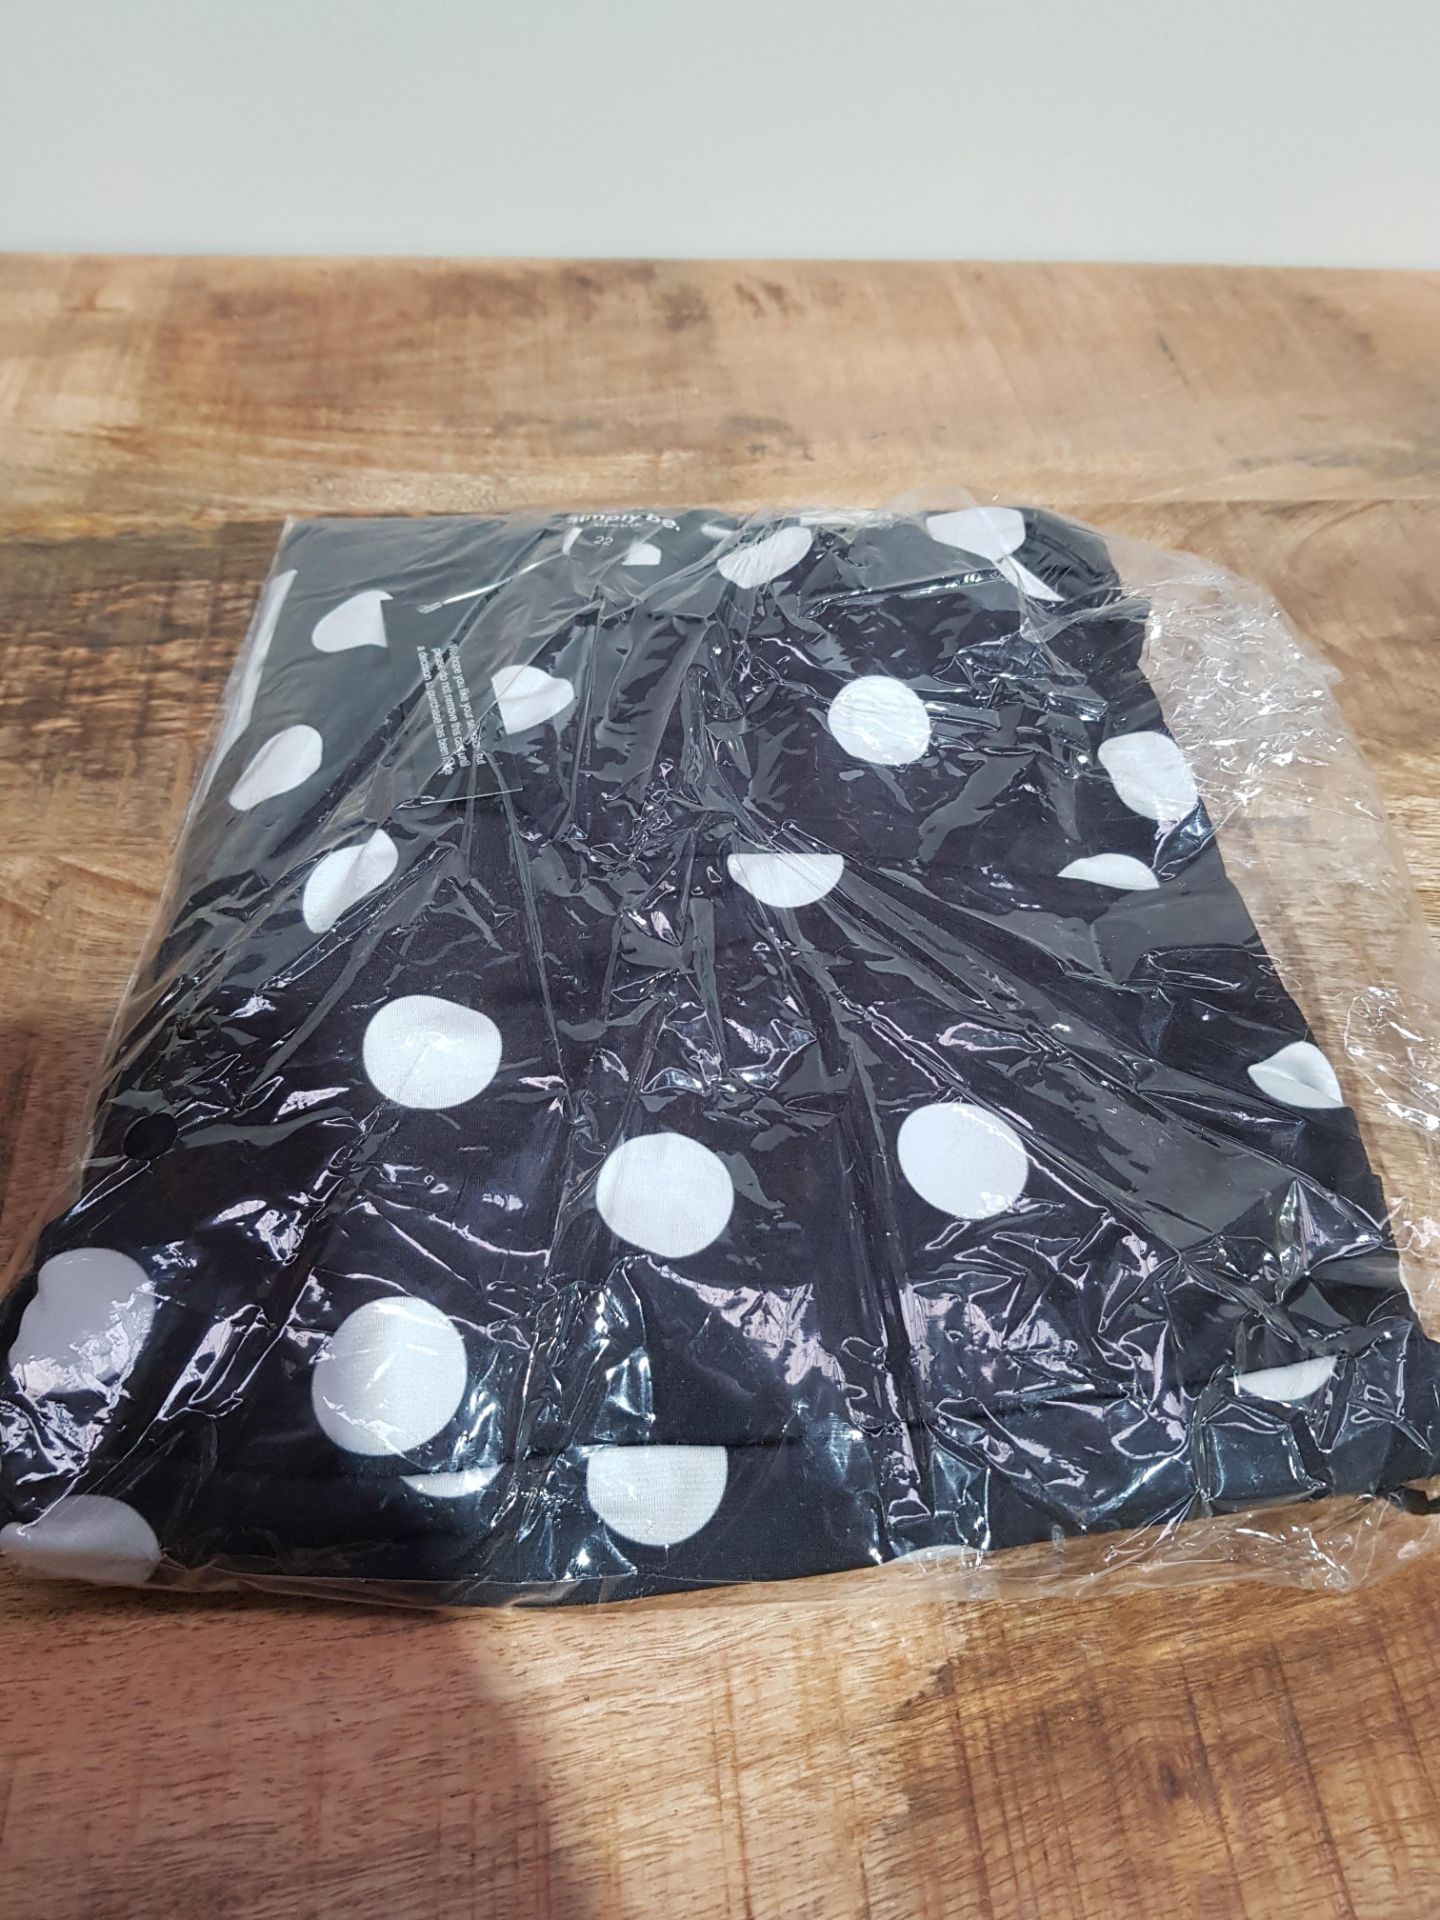 BRAND NEW SIMPLYBE BLACK POLKA DOT TOP SIZE 22 (CR768)Condition ReportBRAND NEW - Image 2 of 2